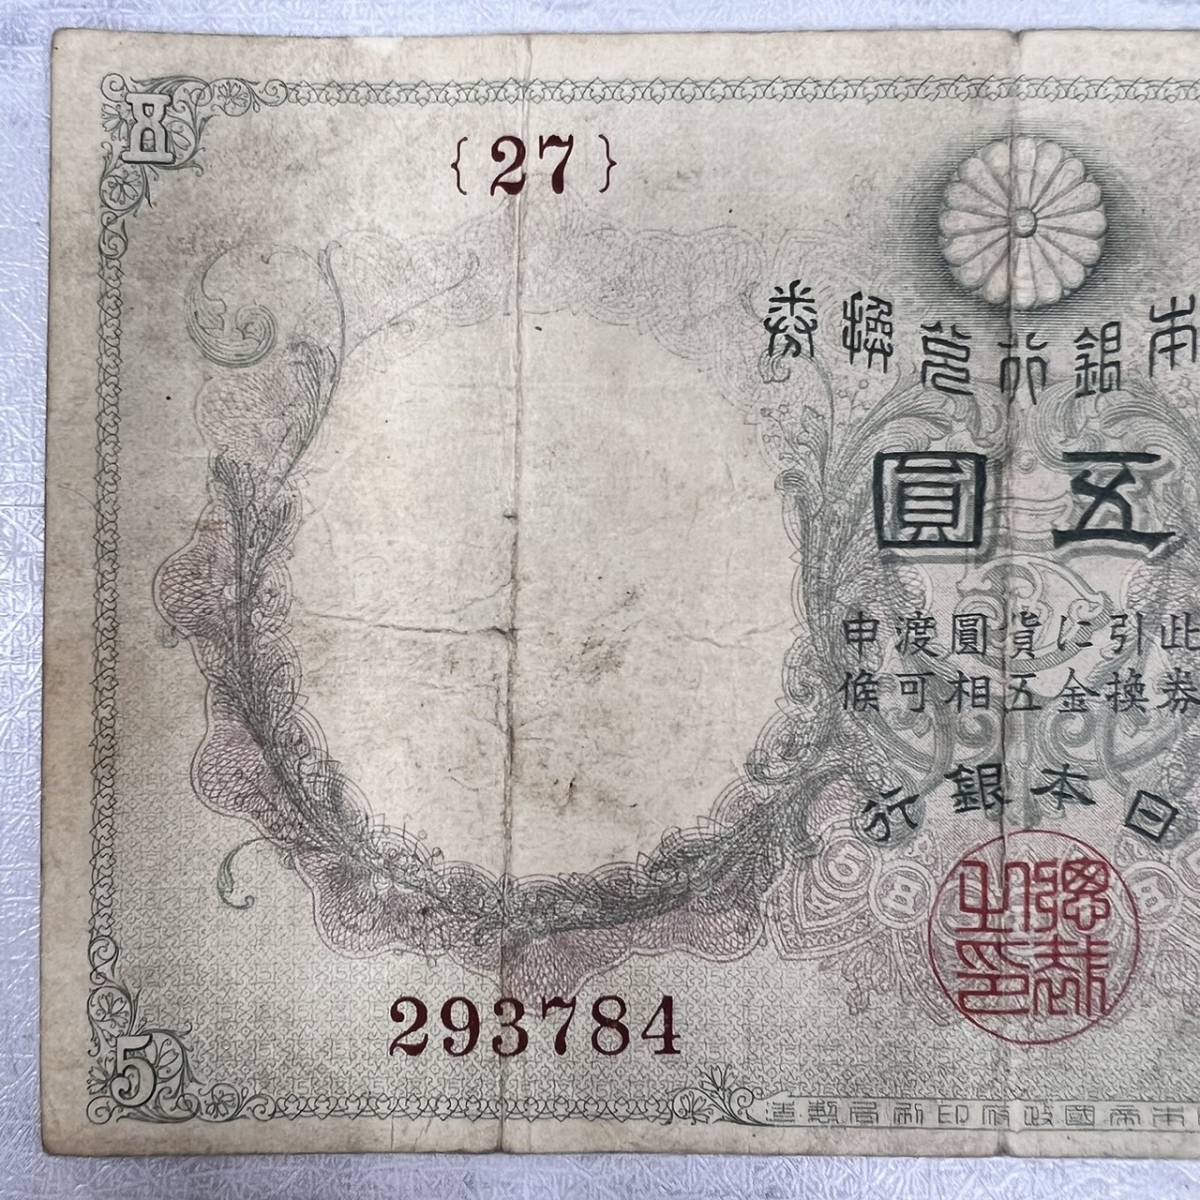  old note Japan note . number .. Bank ticket 5 jpy .. large black 5 jpy .. road genuine ... large black .. old note antique collection [7500